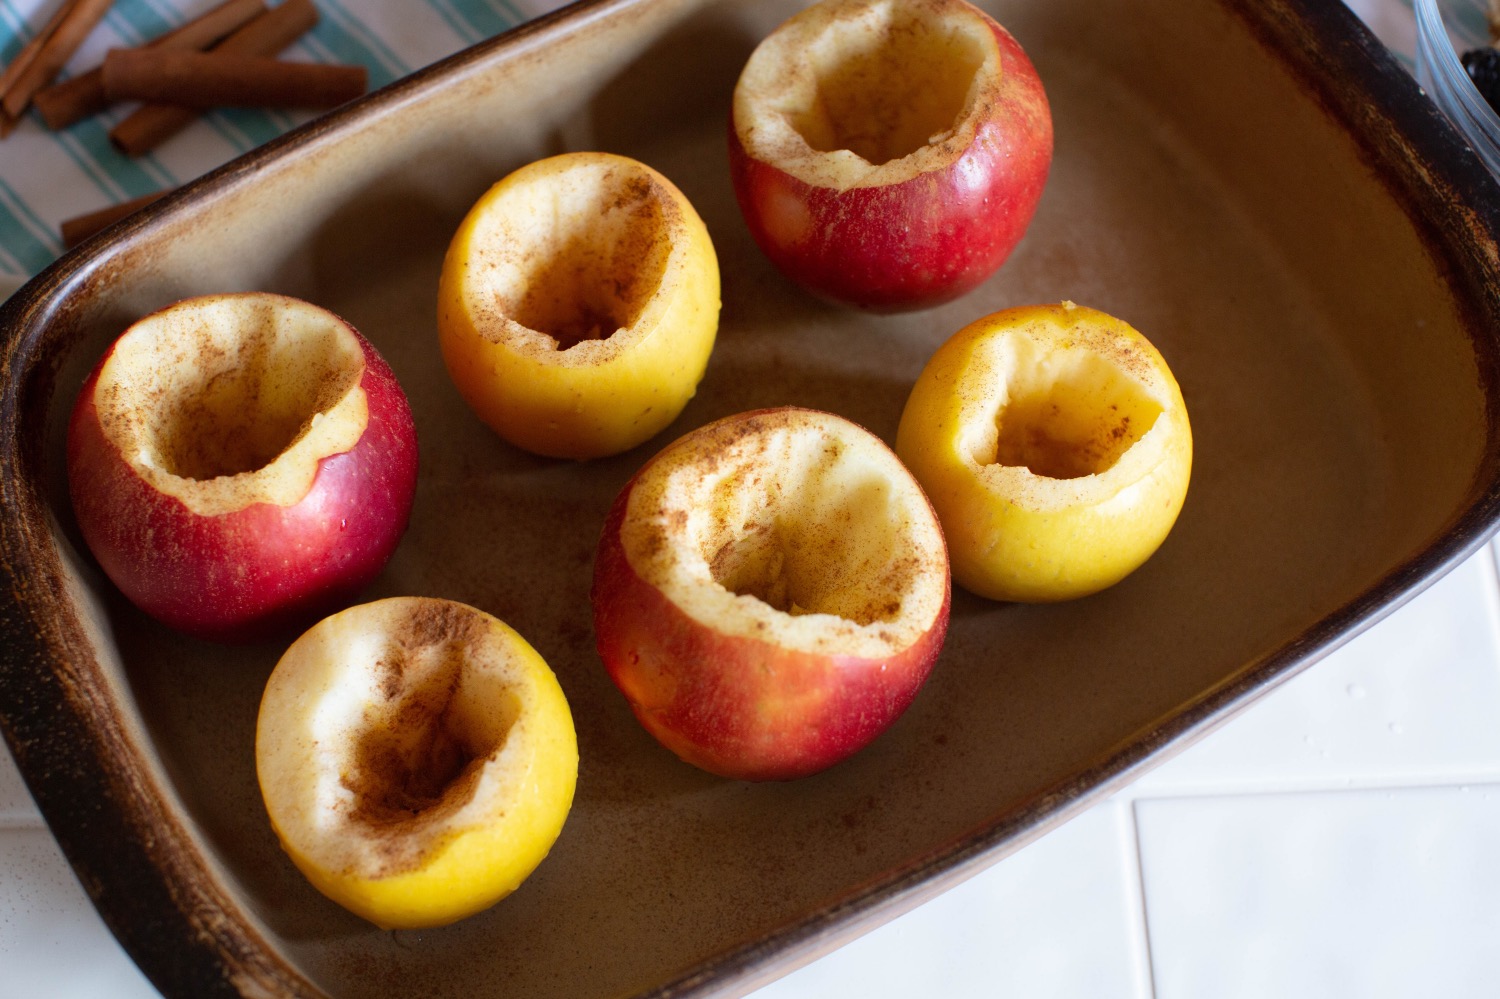 sprinkle hollow baked apples with cinnamon